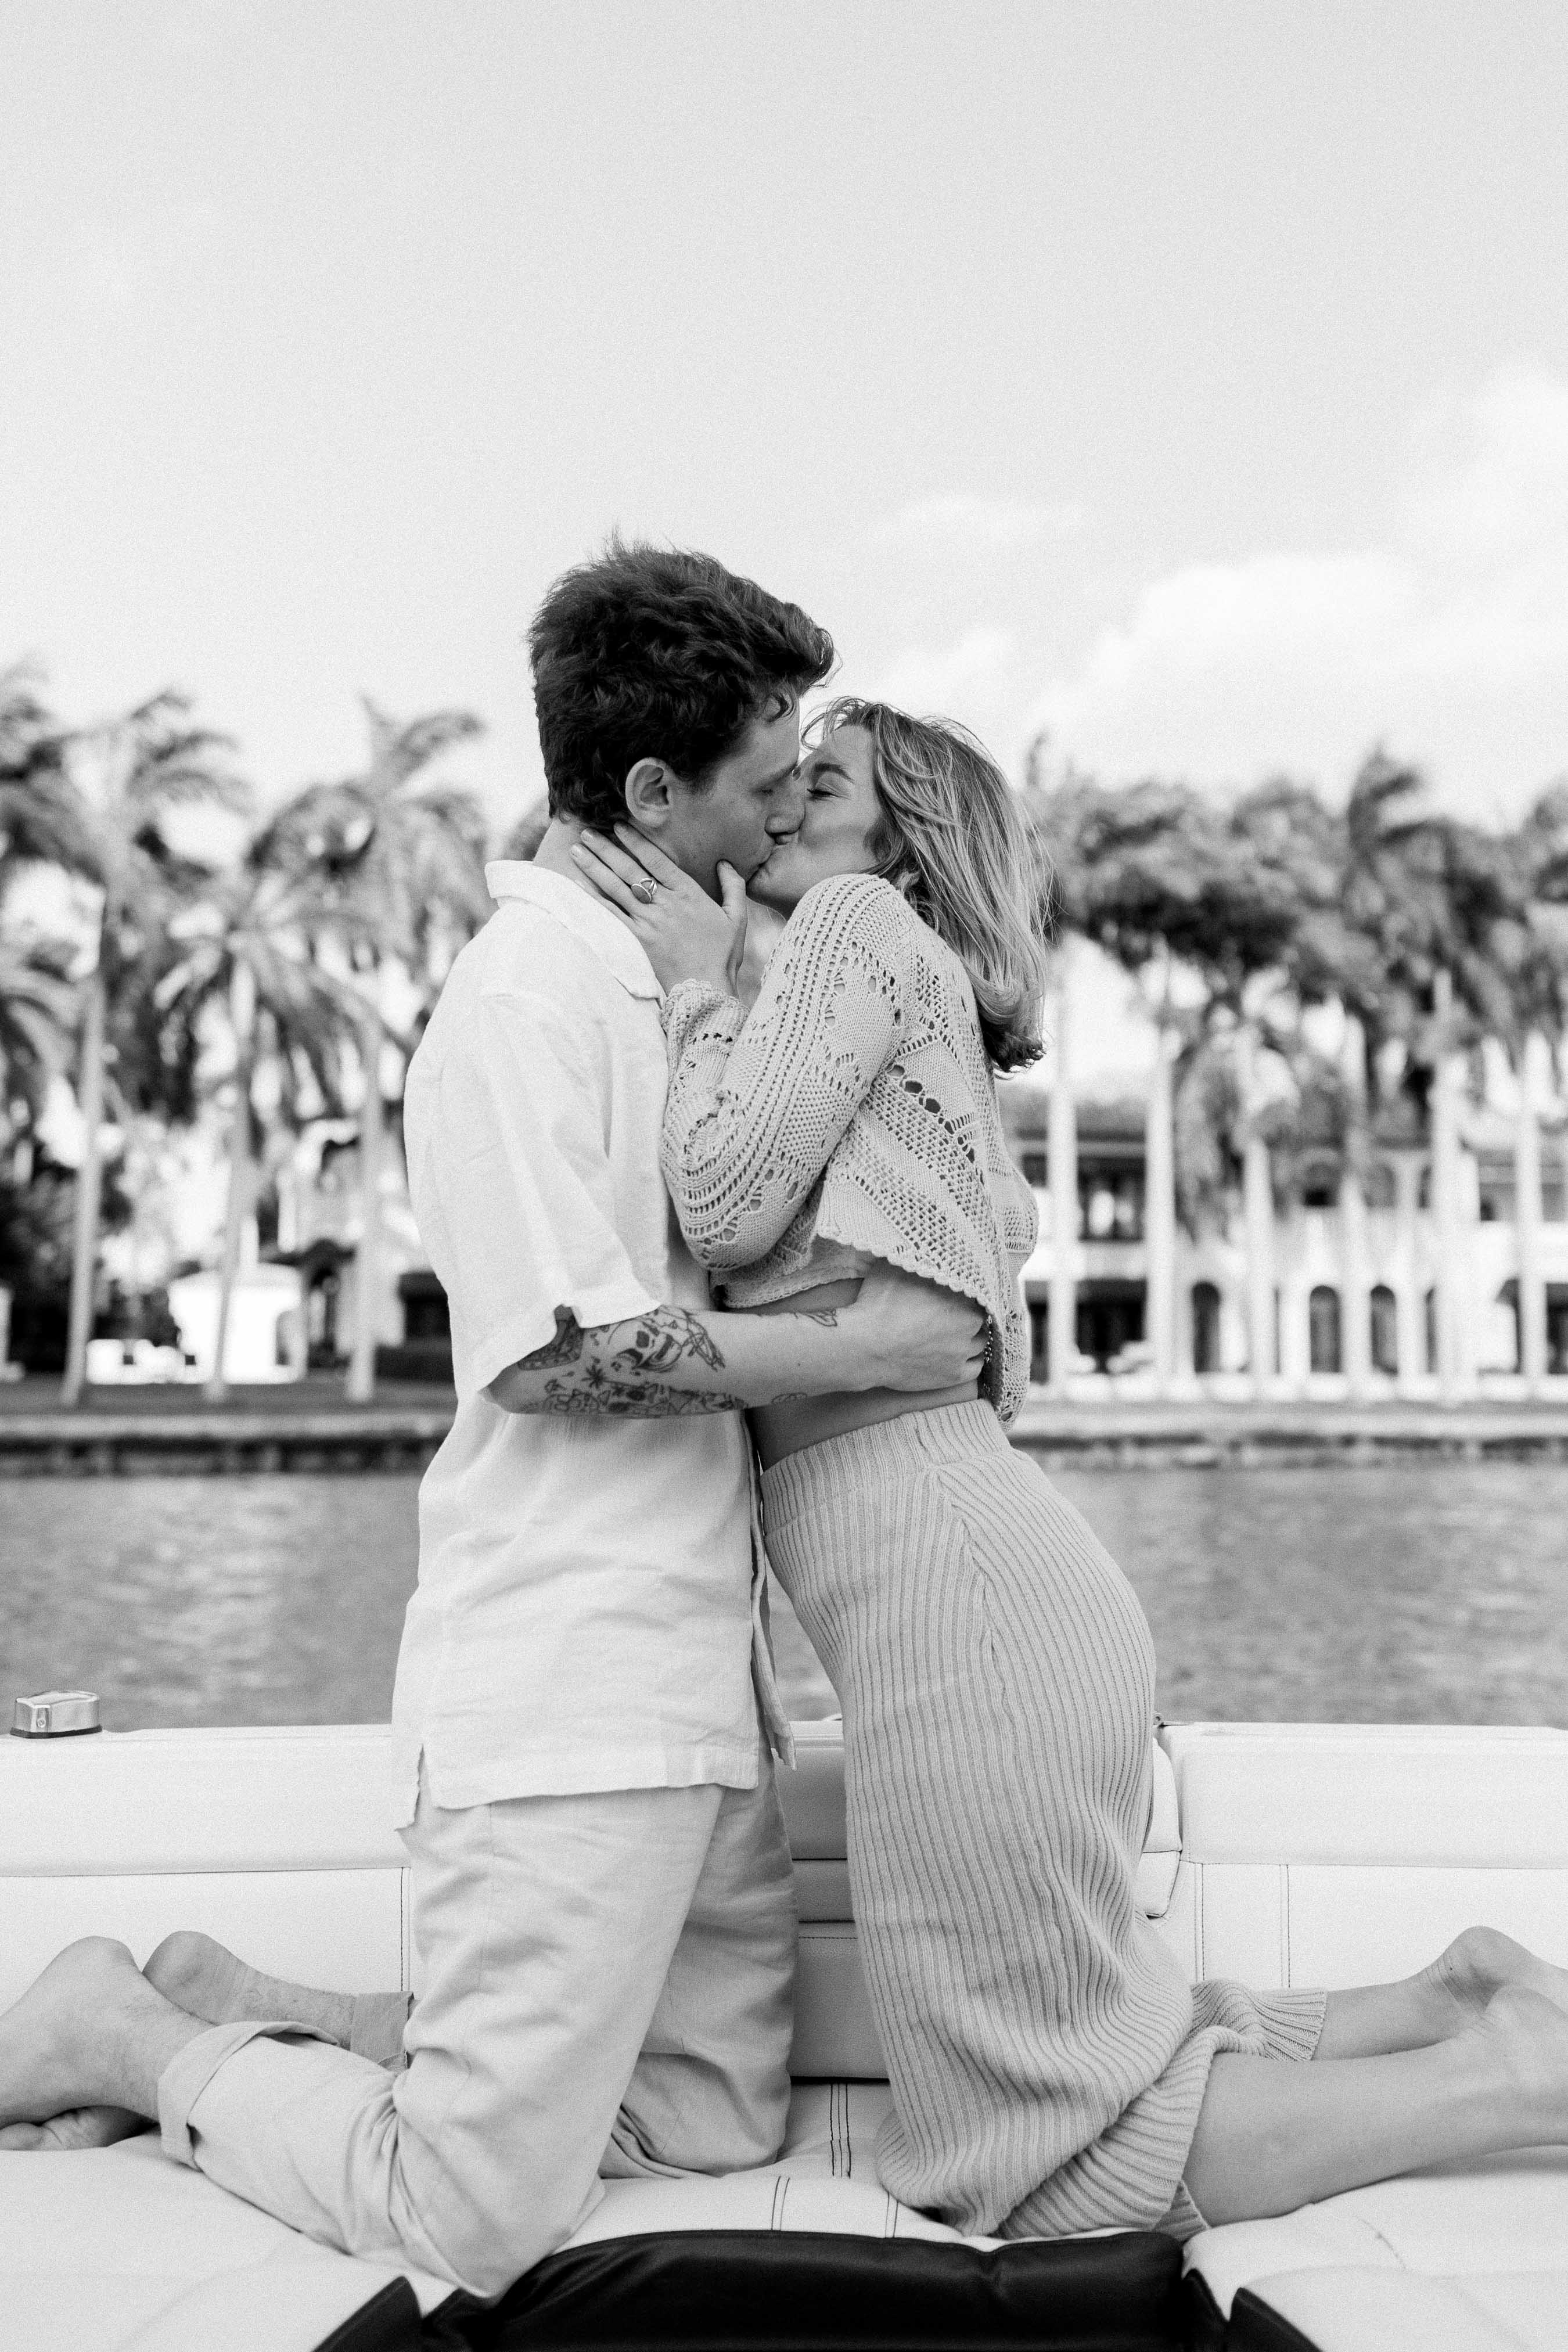 Non traditional engagement photo ideas - rent a boat